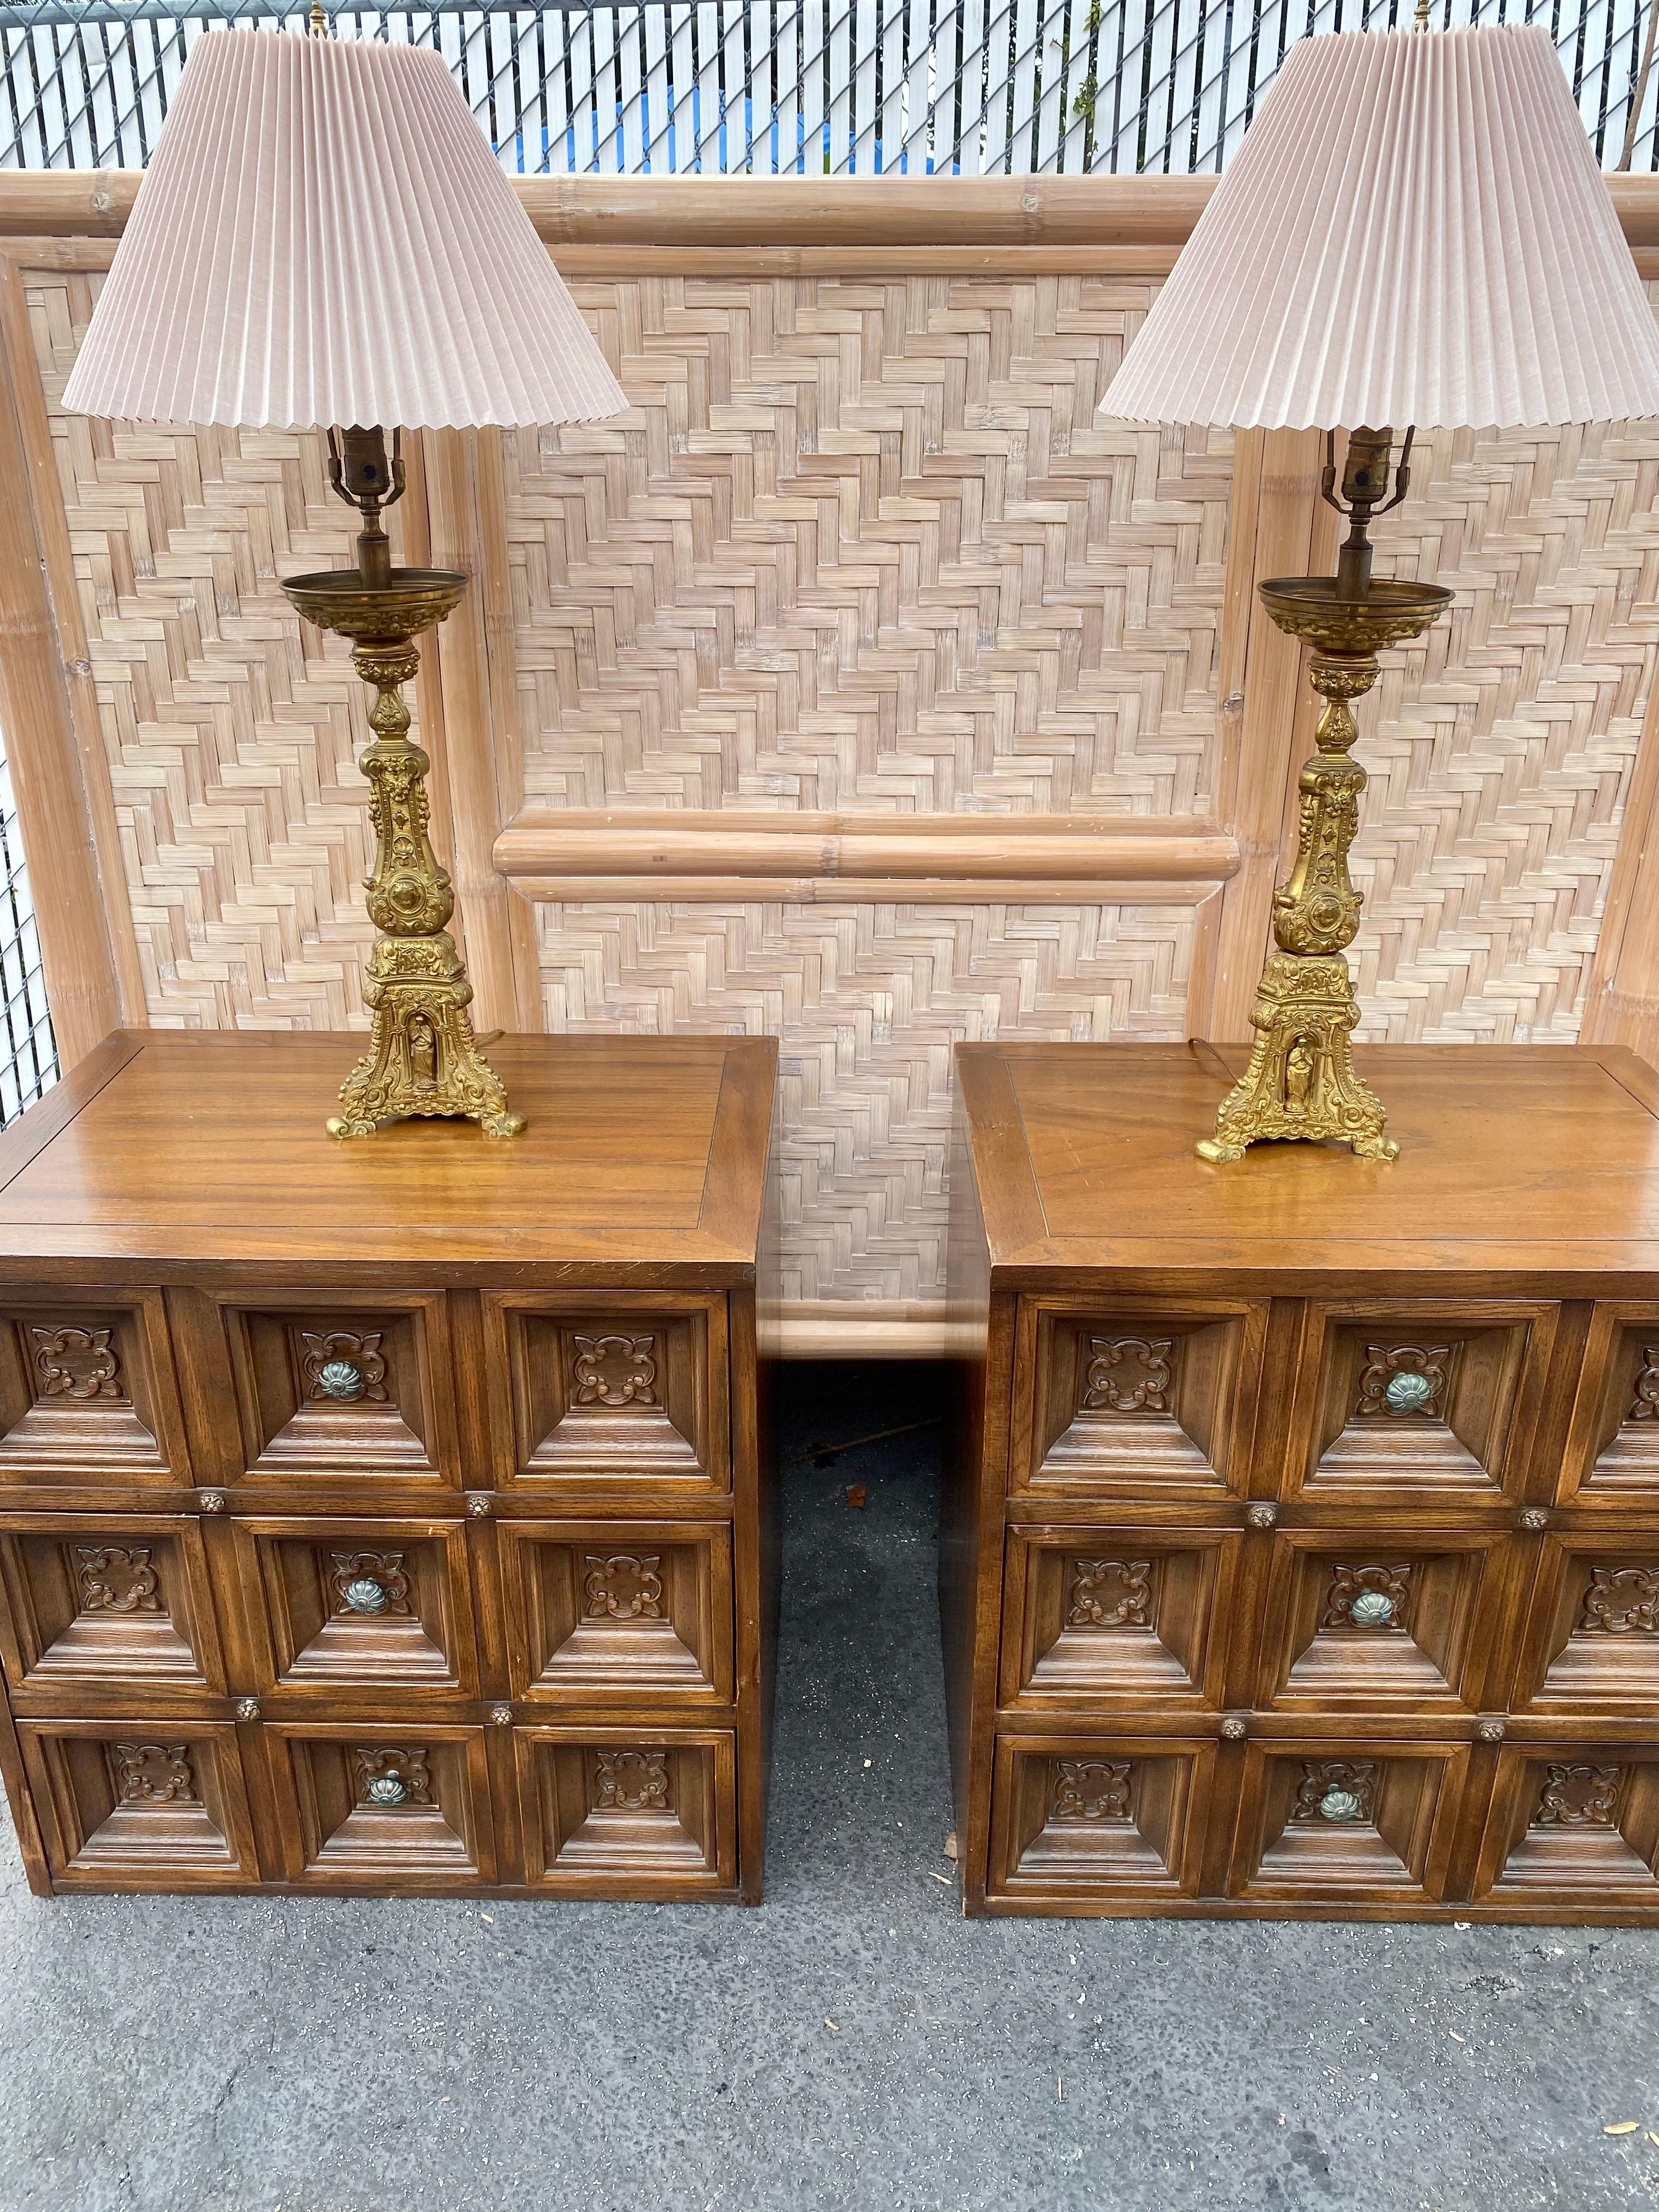 On offer on this occasion is one of the most stunning and bronze lamps you could hope to find. Outstanding design is exhibited throughout. The beautiful set is statement piece and packed with personality!  Just look at the gorgeous details on this